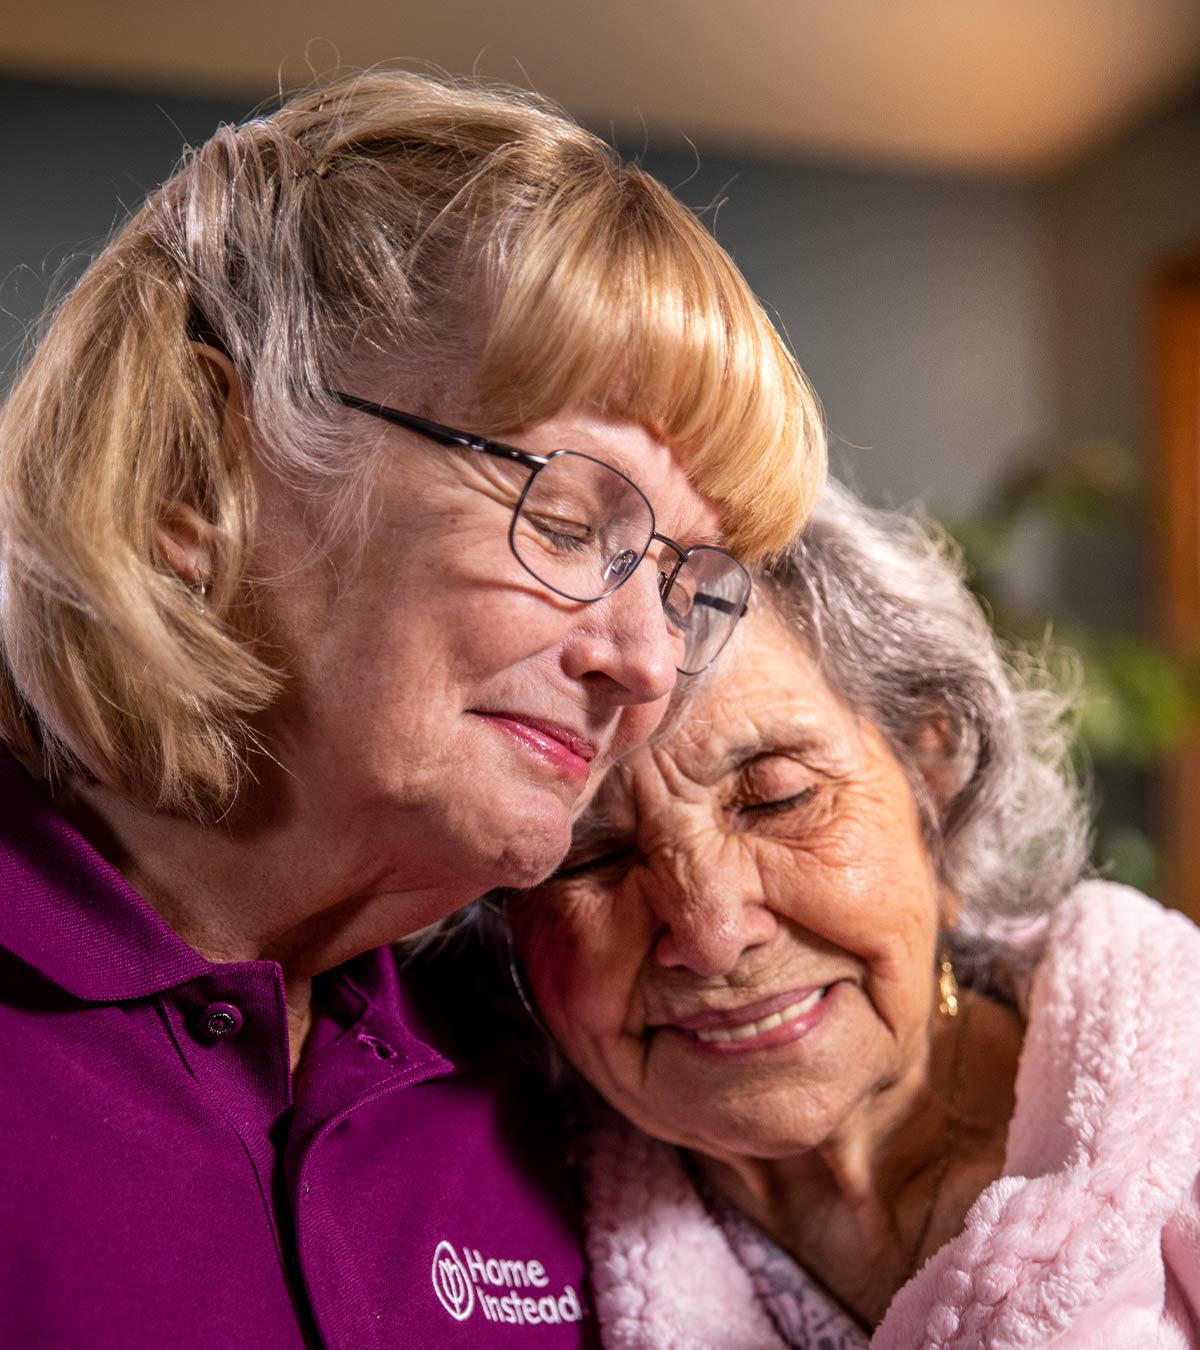 CAREGiver providing in-home senior care services. Home Instead of Charlottesville, VA provides Elder Care to aging adults. 